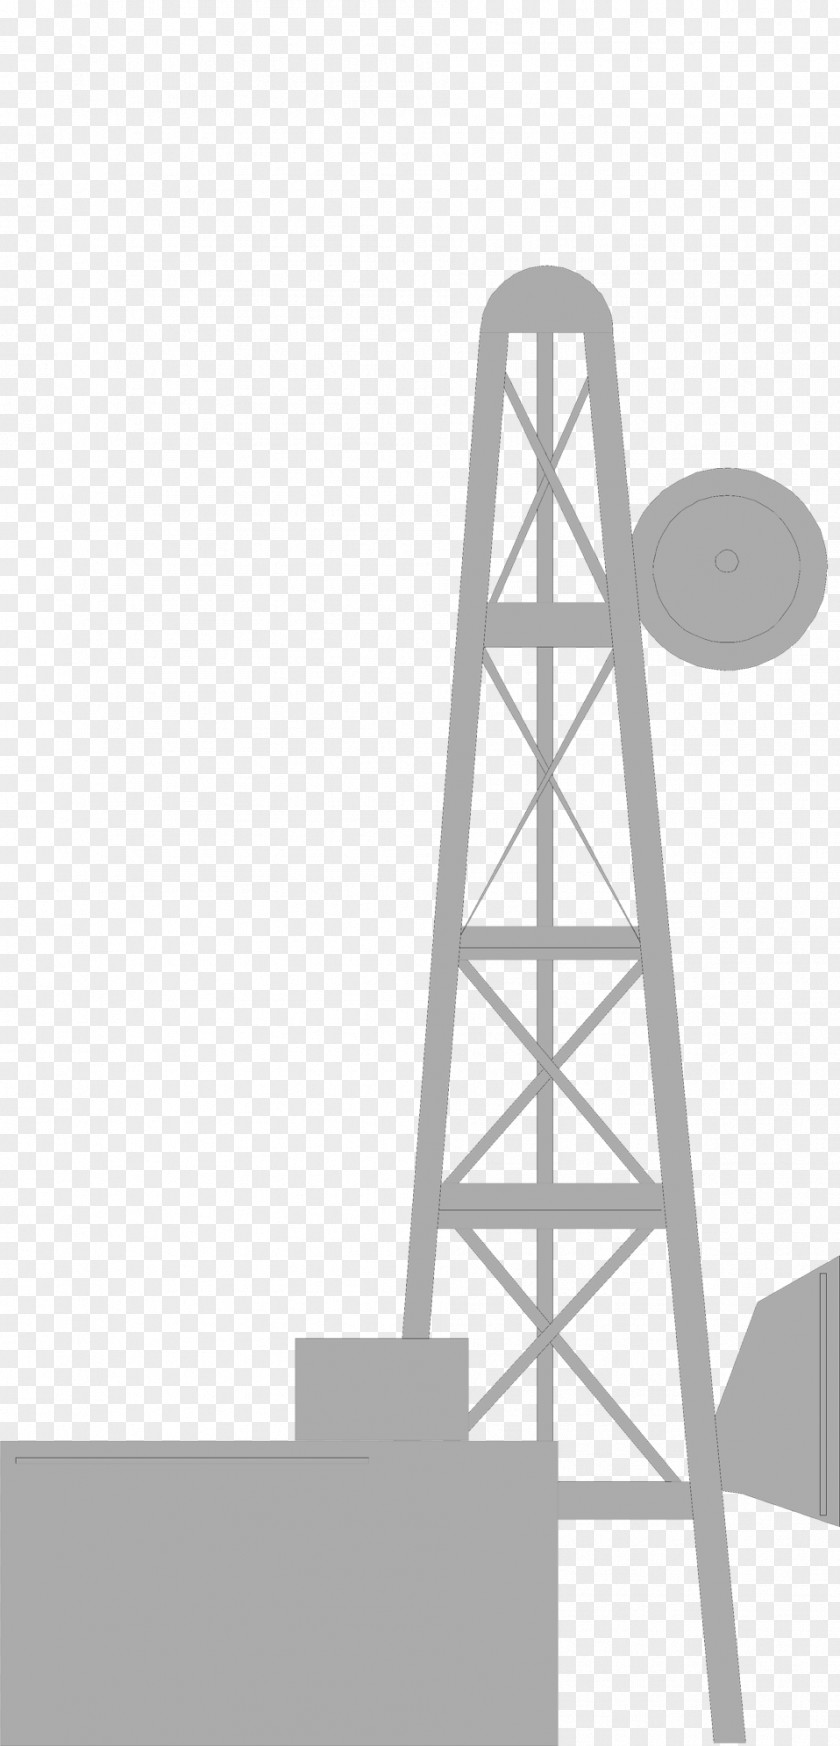 Microwave Telecommunications Tower Antenna Transmission Clip Art PNG